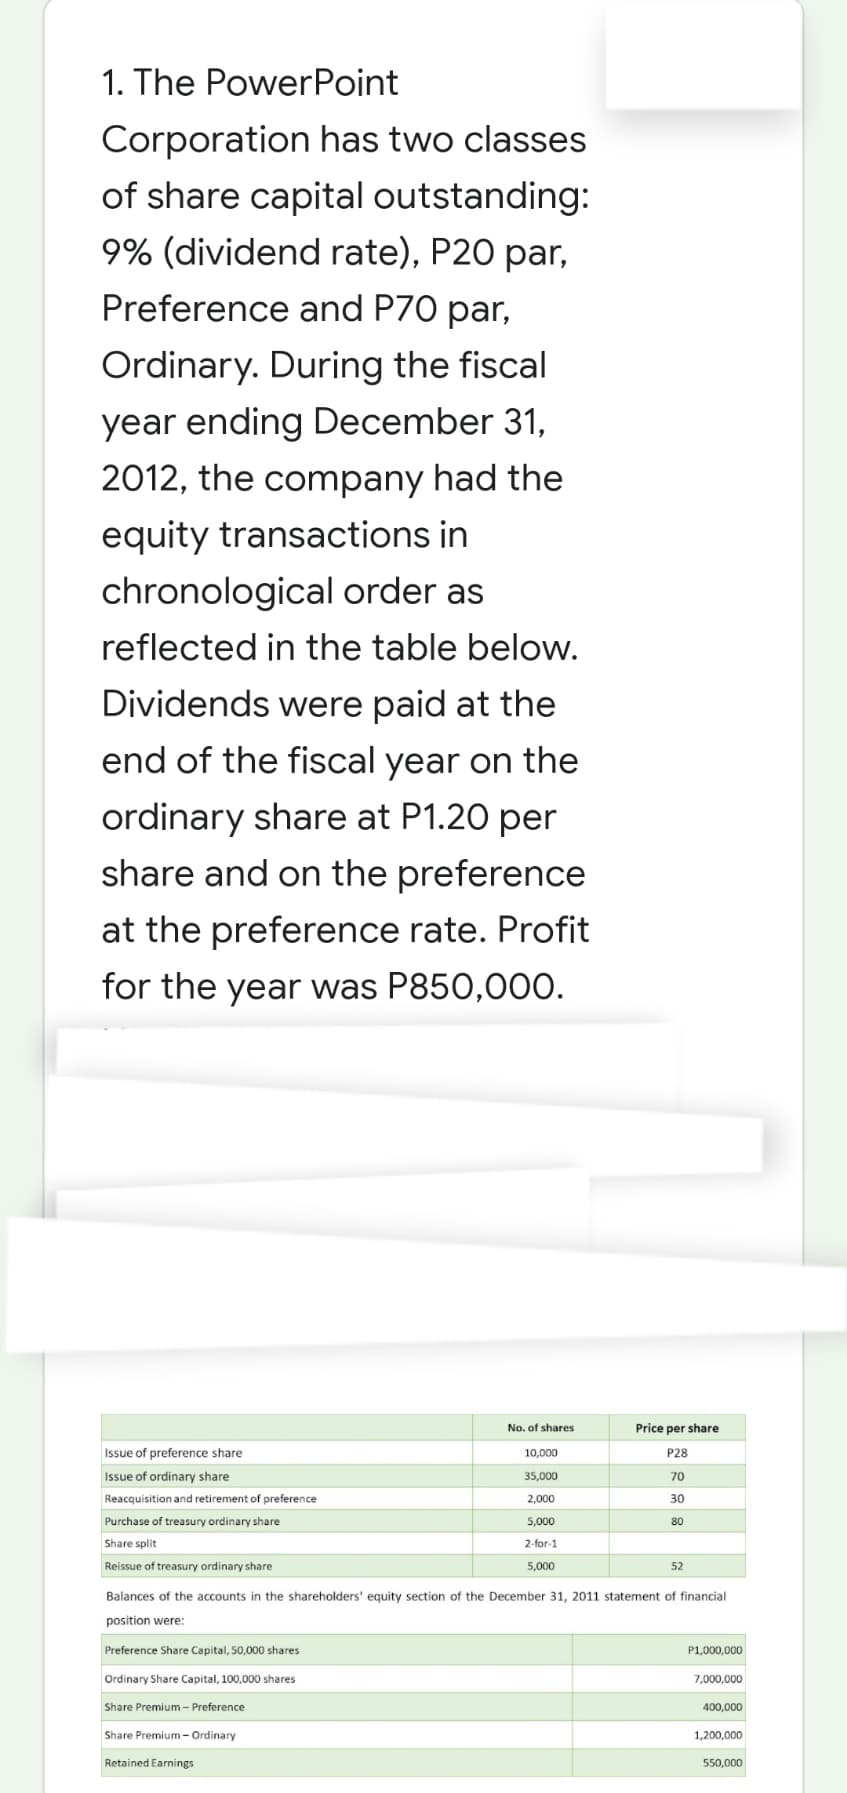 1. The PowerPoint
Corporation has two classes
of share capital outstanding:
9% (dividend rate), P20 par,
Preference and P70 par,
Ordinary. During the fiscal
year ending December 31,
2012, the company had the
equity transactions in
chronological order as
reflected in the table below.
Dividends were paid at the
end of the fiscal year on the
ordinary share at P1.20 per
share and on the preference
at the preference rate. Profit
for the year was P850,000.
No. of shares
Price per share
Issue of preference share
10,000
P28
Issue of ordinary share
35,000
70
Reacquisition and retirement of preference
2,000
30
Purchase of treasury ordinary share
5,000
80
Share split
2-for-1
Reissue of treasury ordinary share.
5,000
52
Balances of the accounts in the shareholders' equity section of the December 31, 2011 statement of financial
position were:
Preference Share Capital, 50,000 shares
P1,000,000
Ordinary Share Capital, 100,000 shares
7,000,000
Share Premium - Preference
400,000
Share Premium-Ordinary
1,200,000
Retained Earnings
550,000